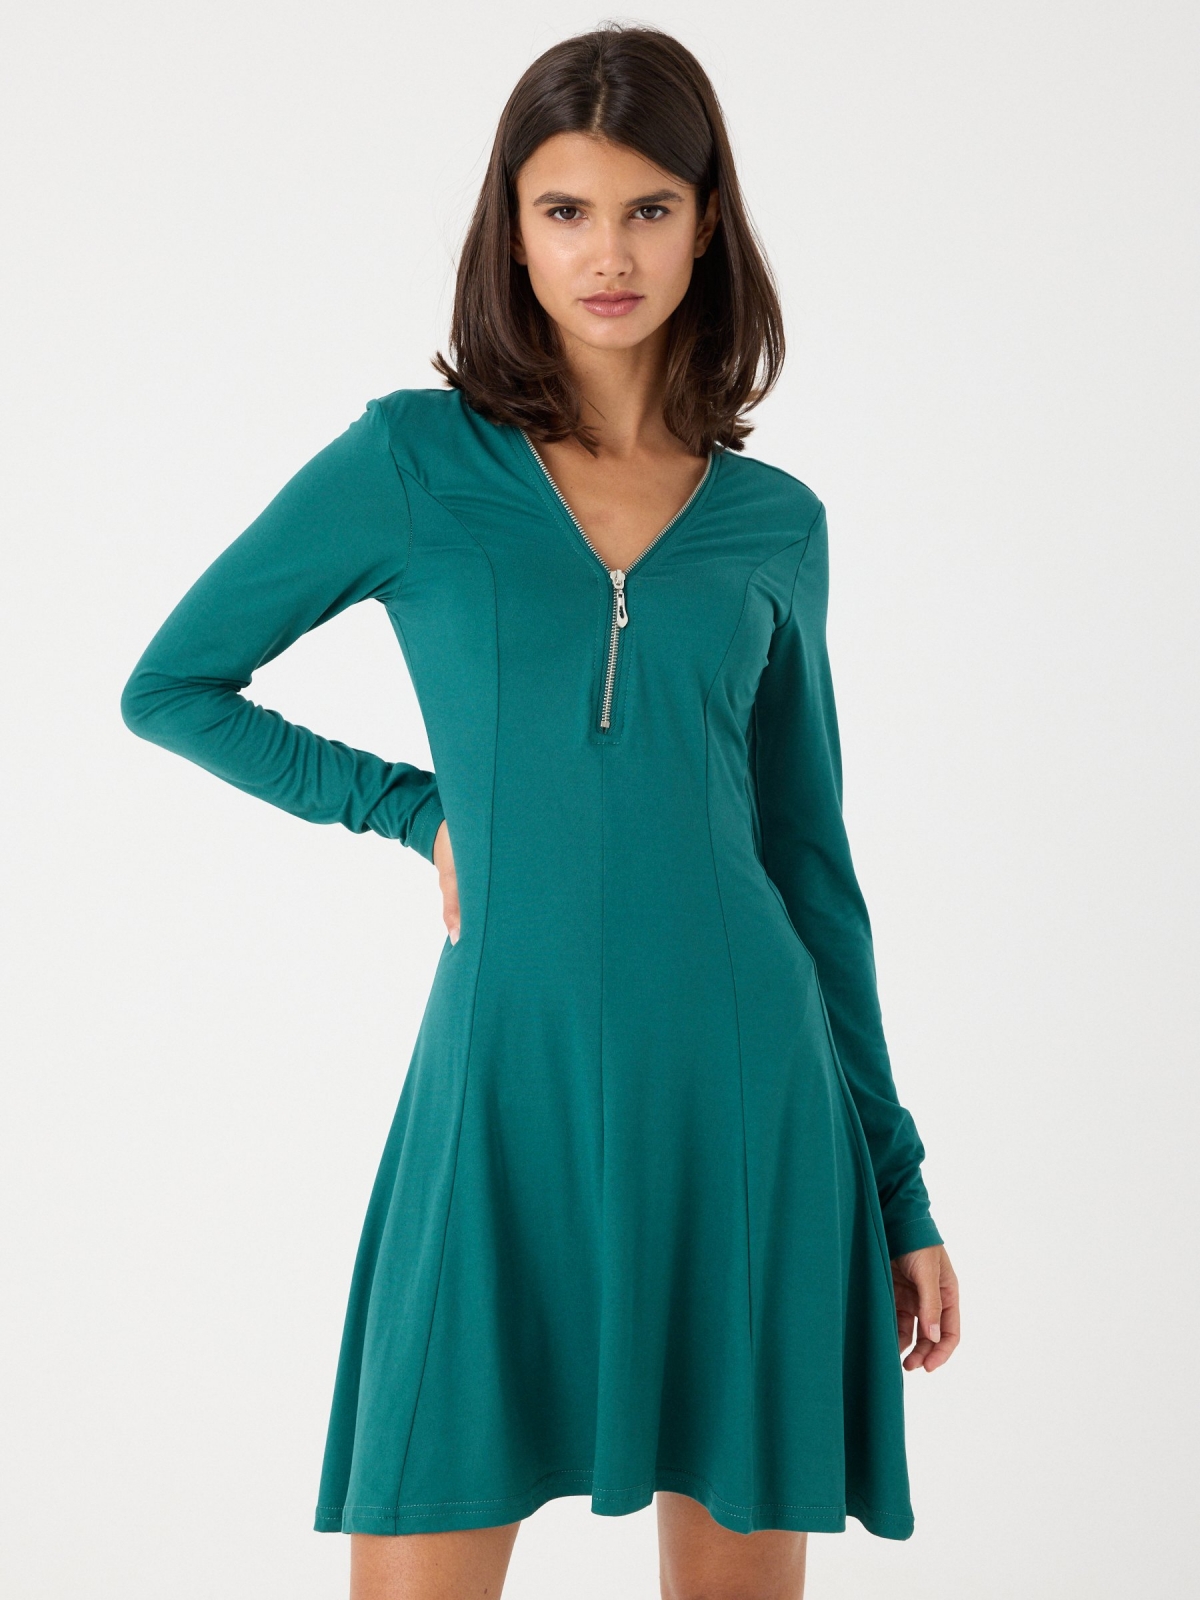 Mini dress with zipper neckline green middle front view